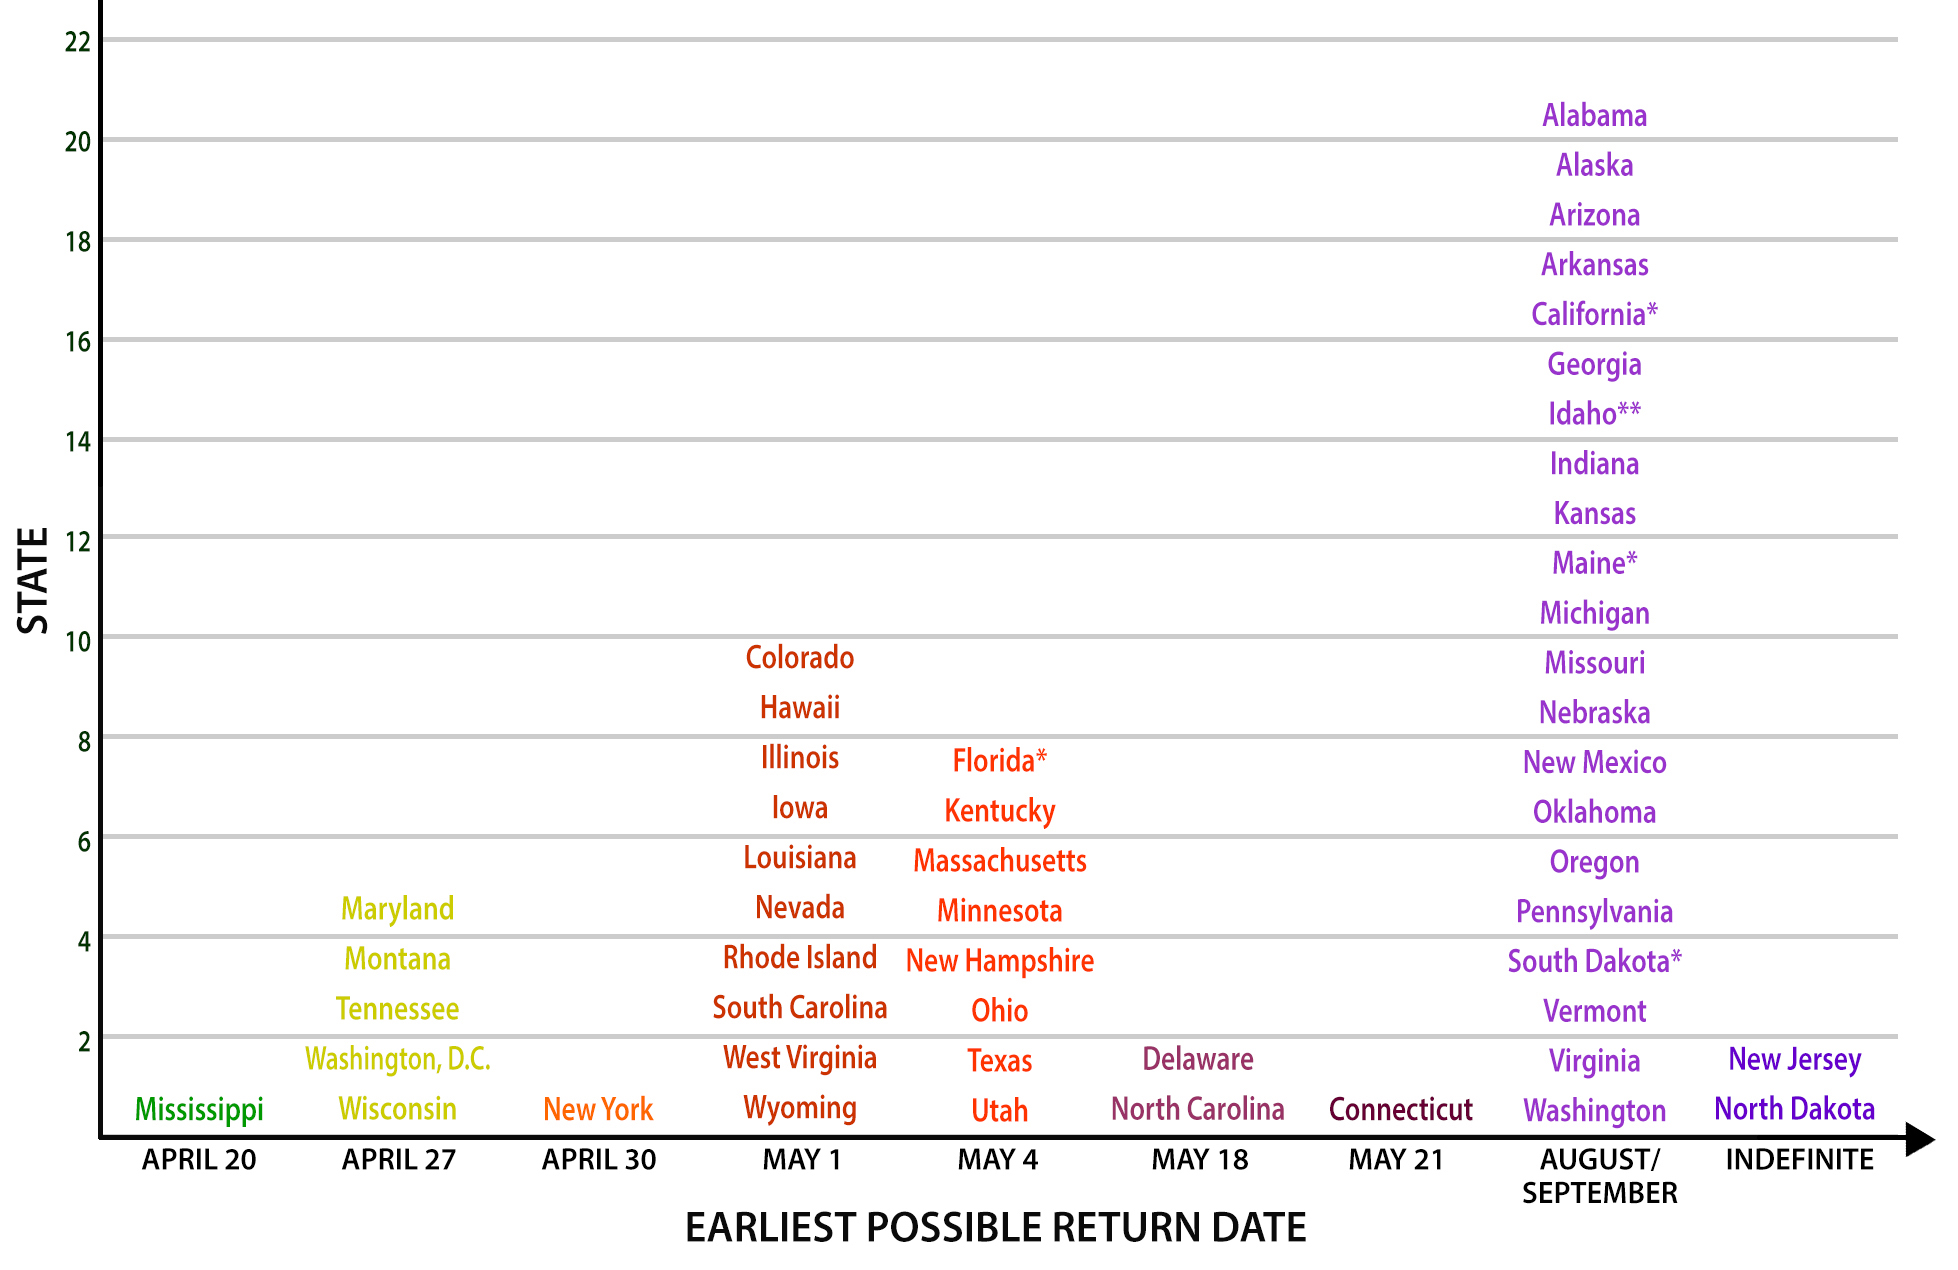 Graphic depicting earliest possible return date for schools by state